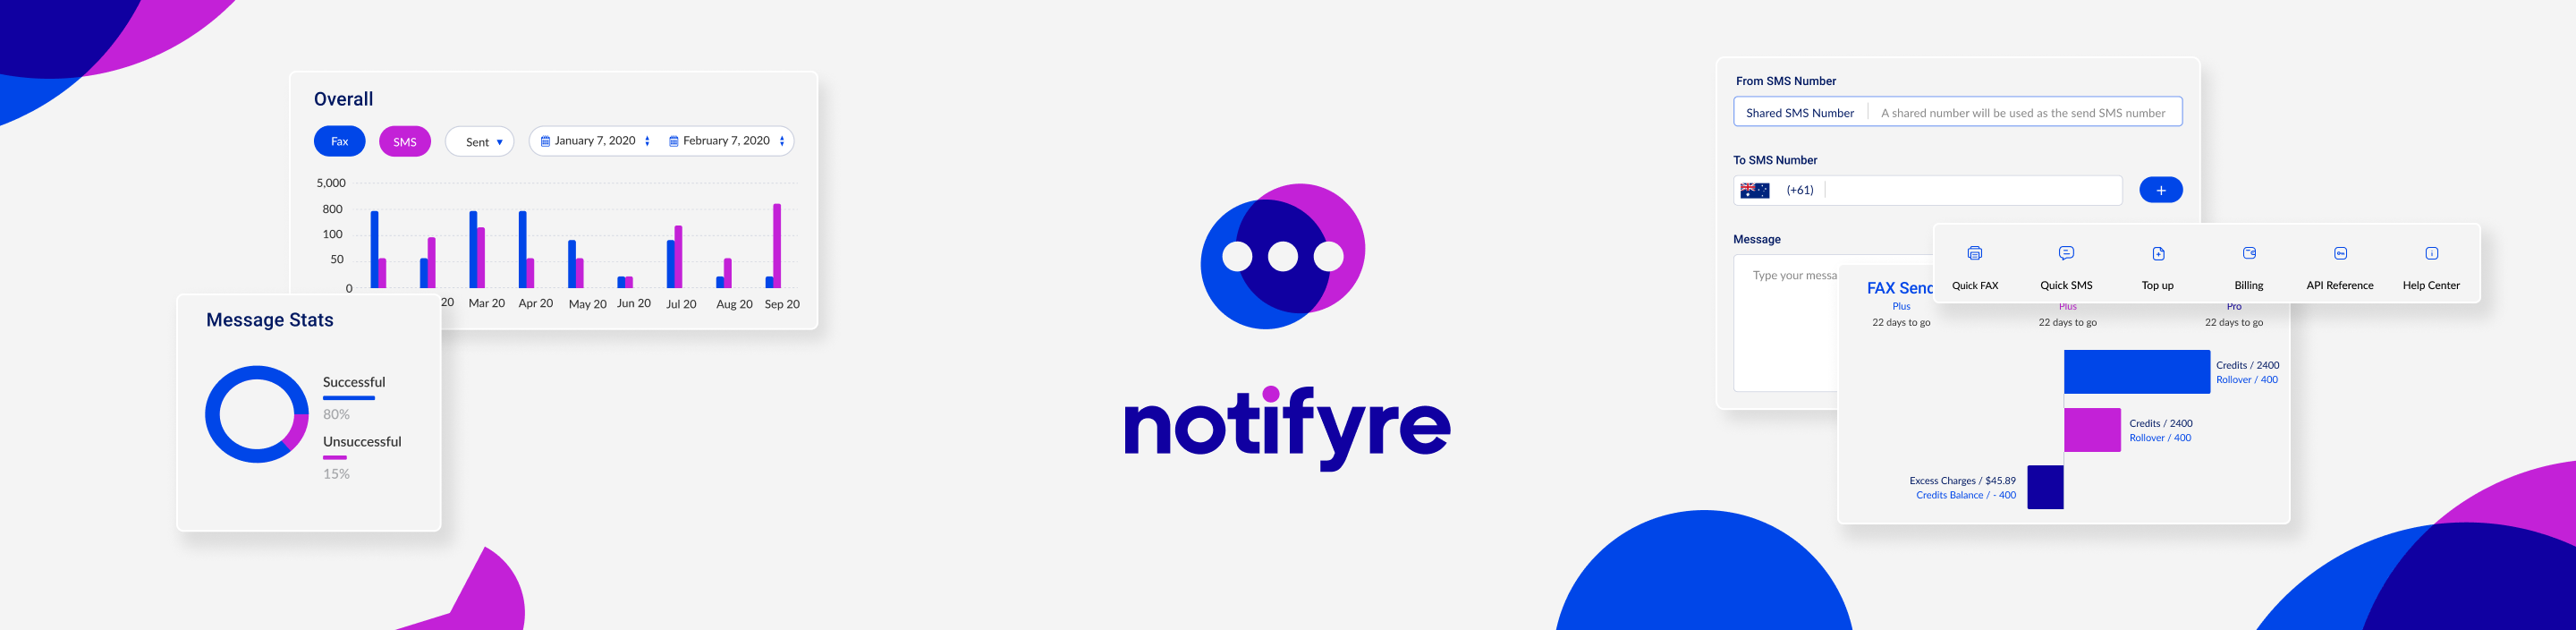 notifyre-a-multi-channel-communications-platform-for-business